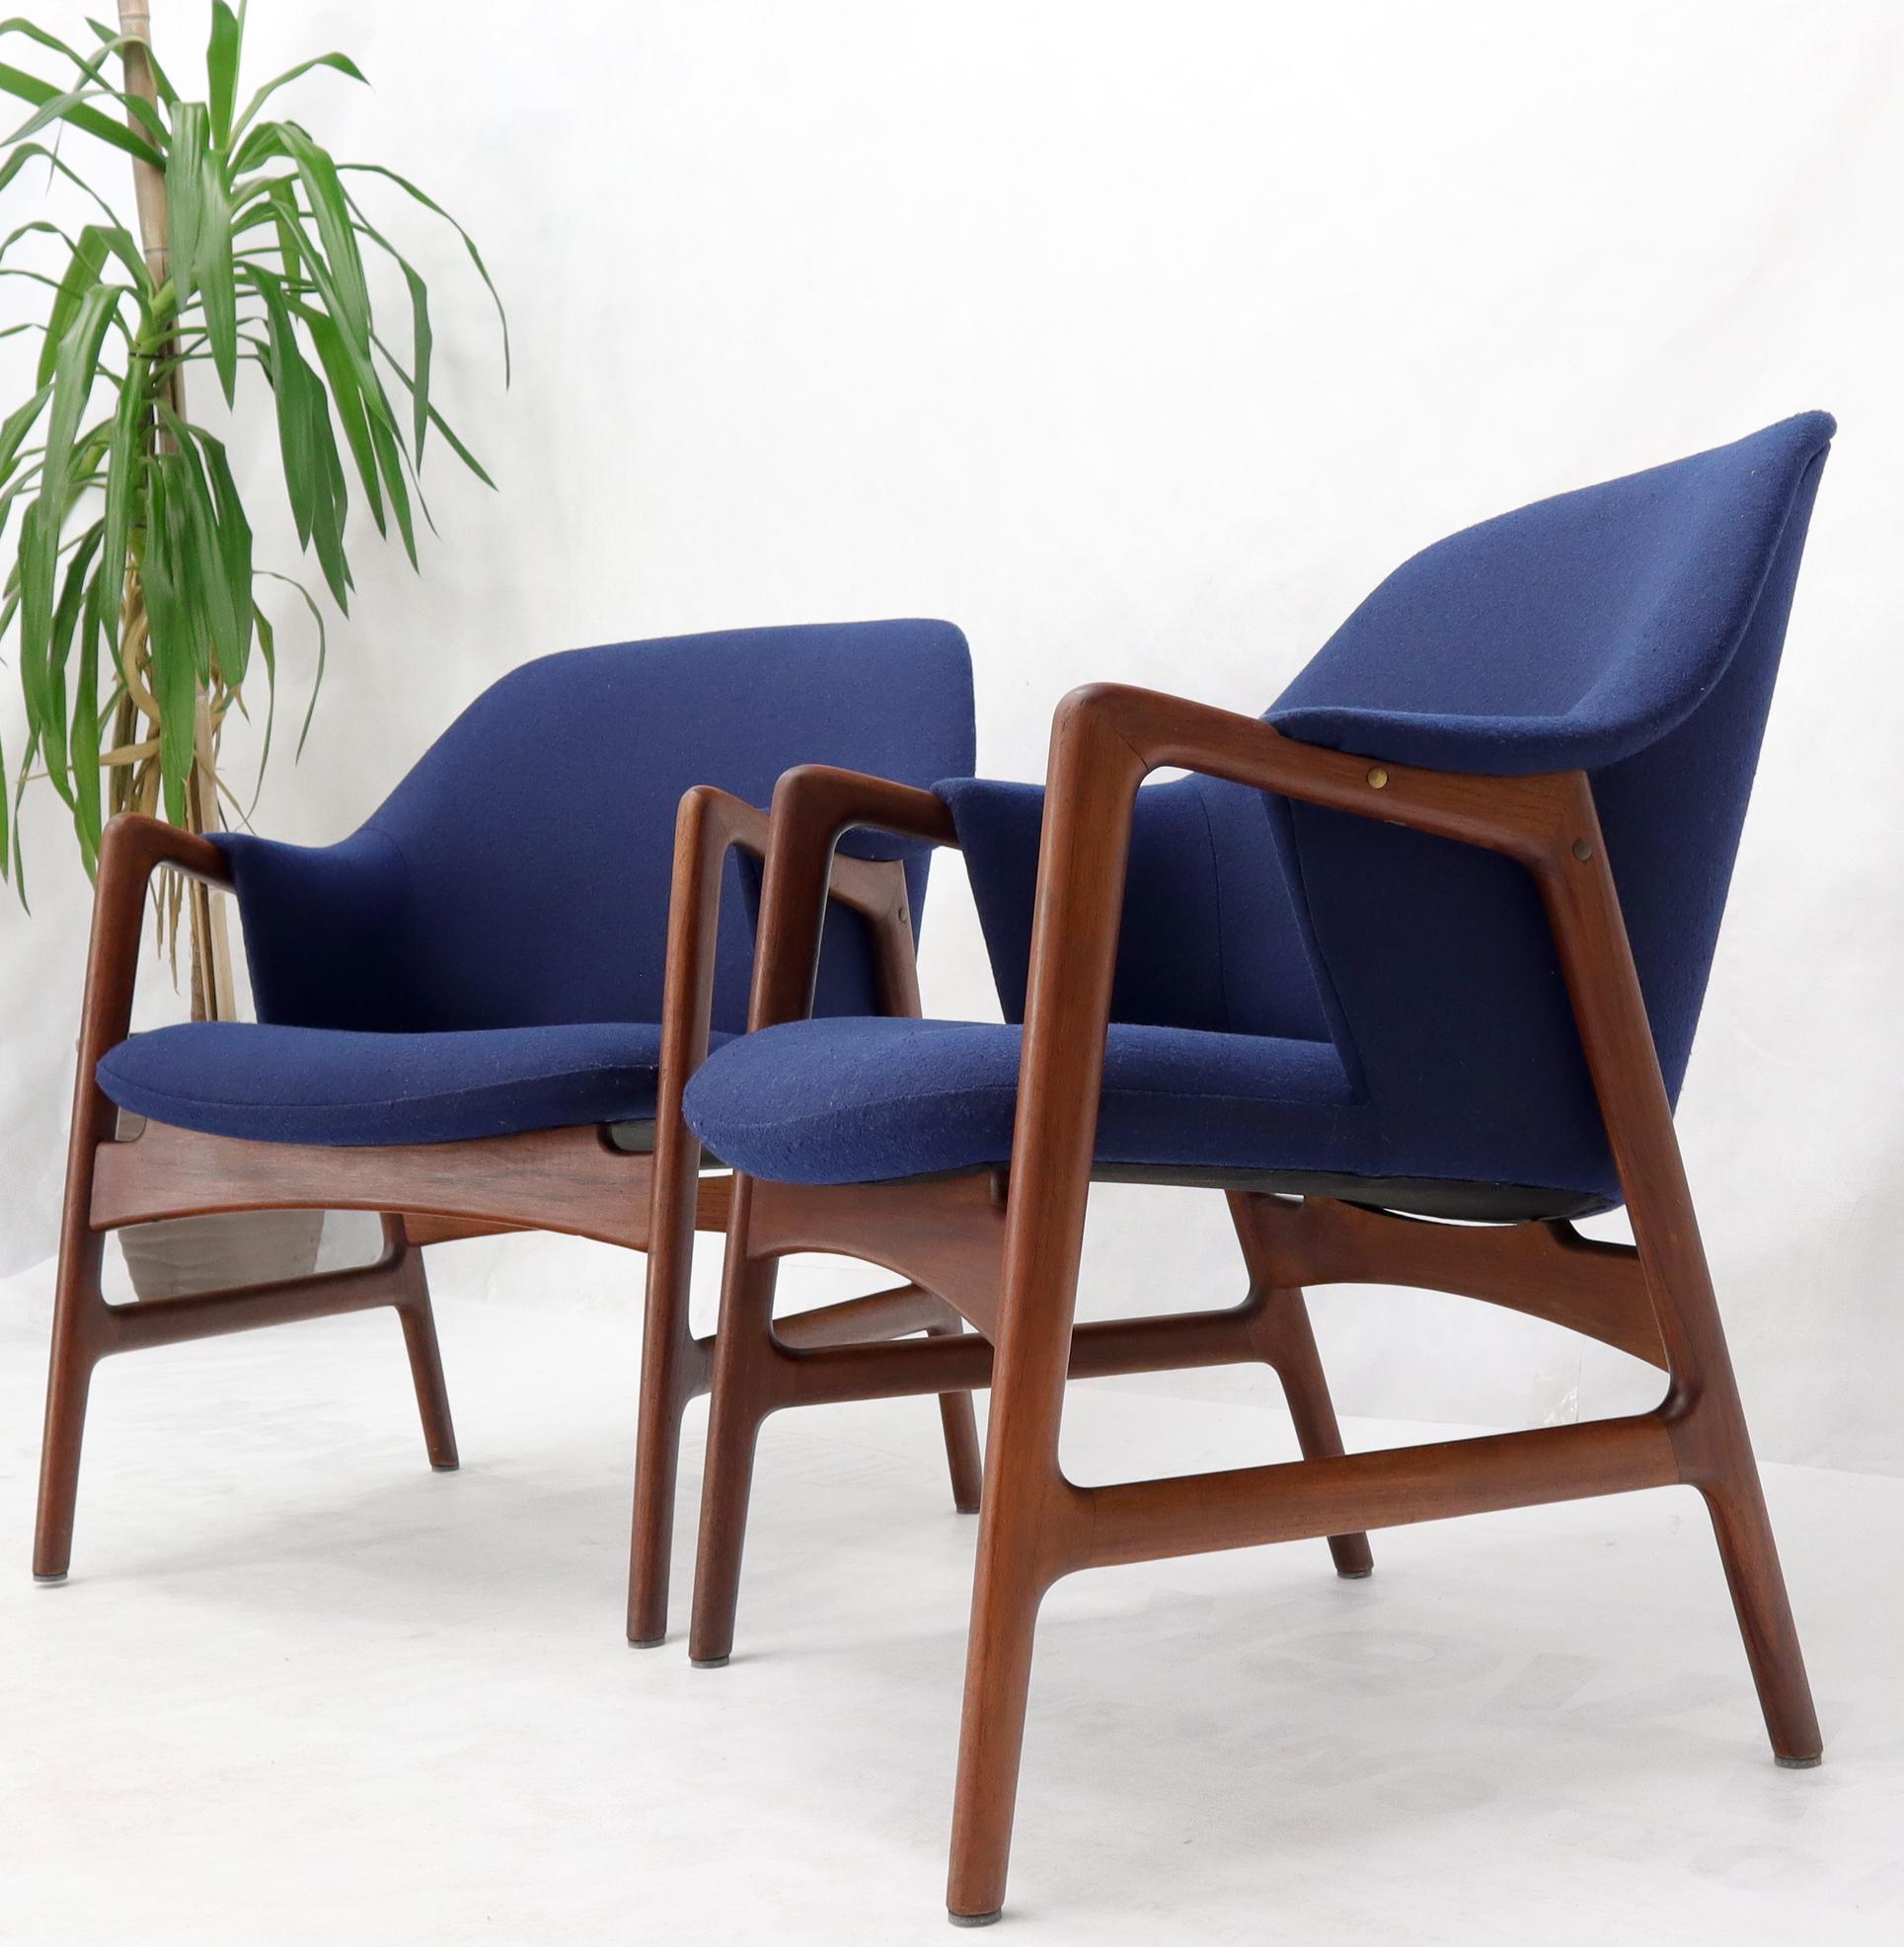 New Blue Wool Upholstery Teak Frames Danish Mid-Century Modern Lounge Chairs For Sale 1